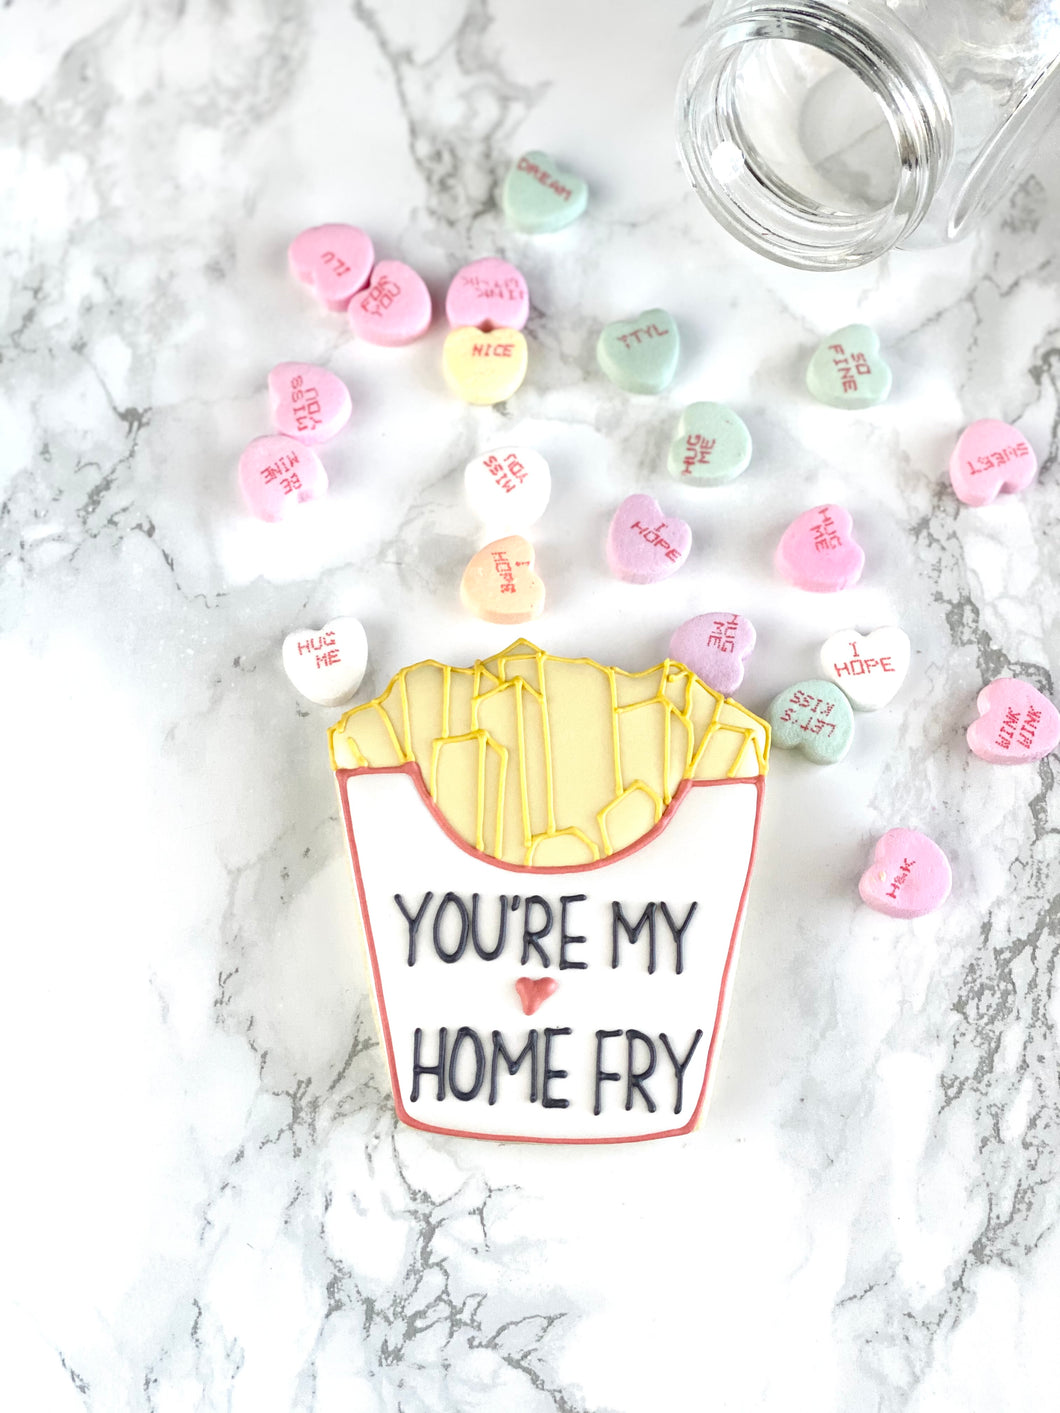 You’re my home fry OR Fries before guys